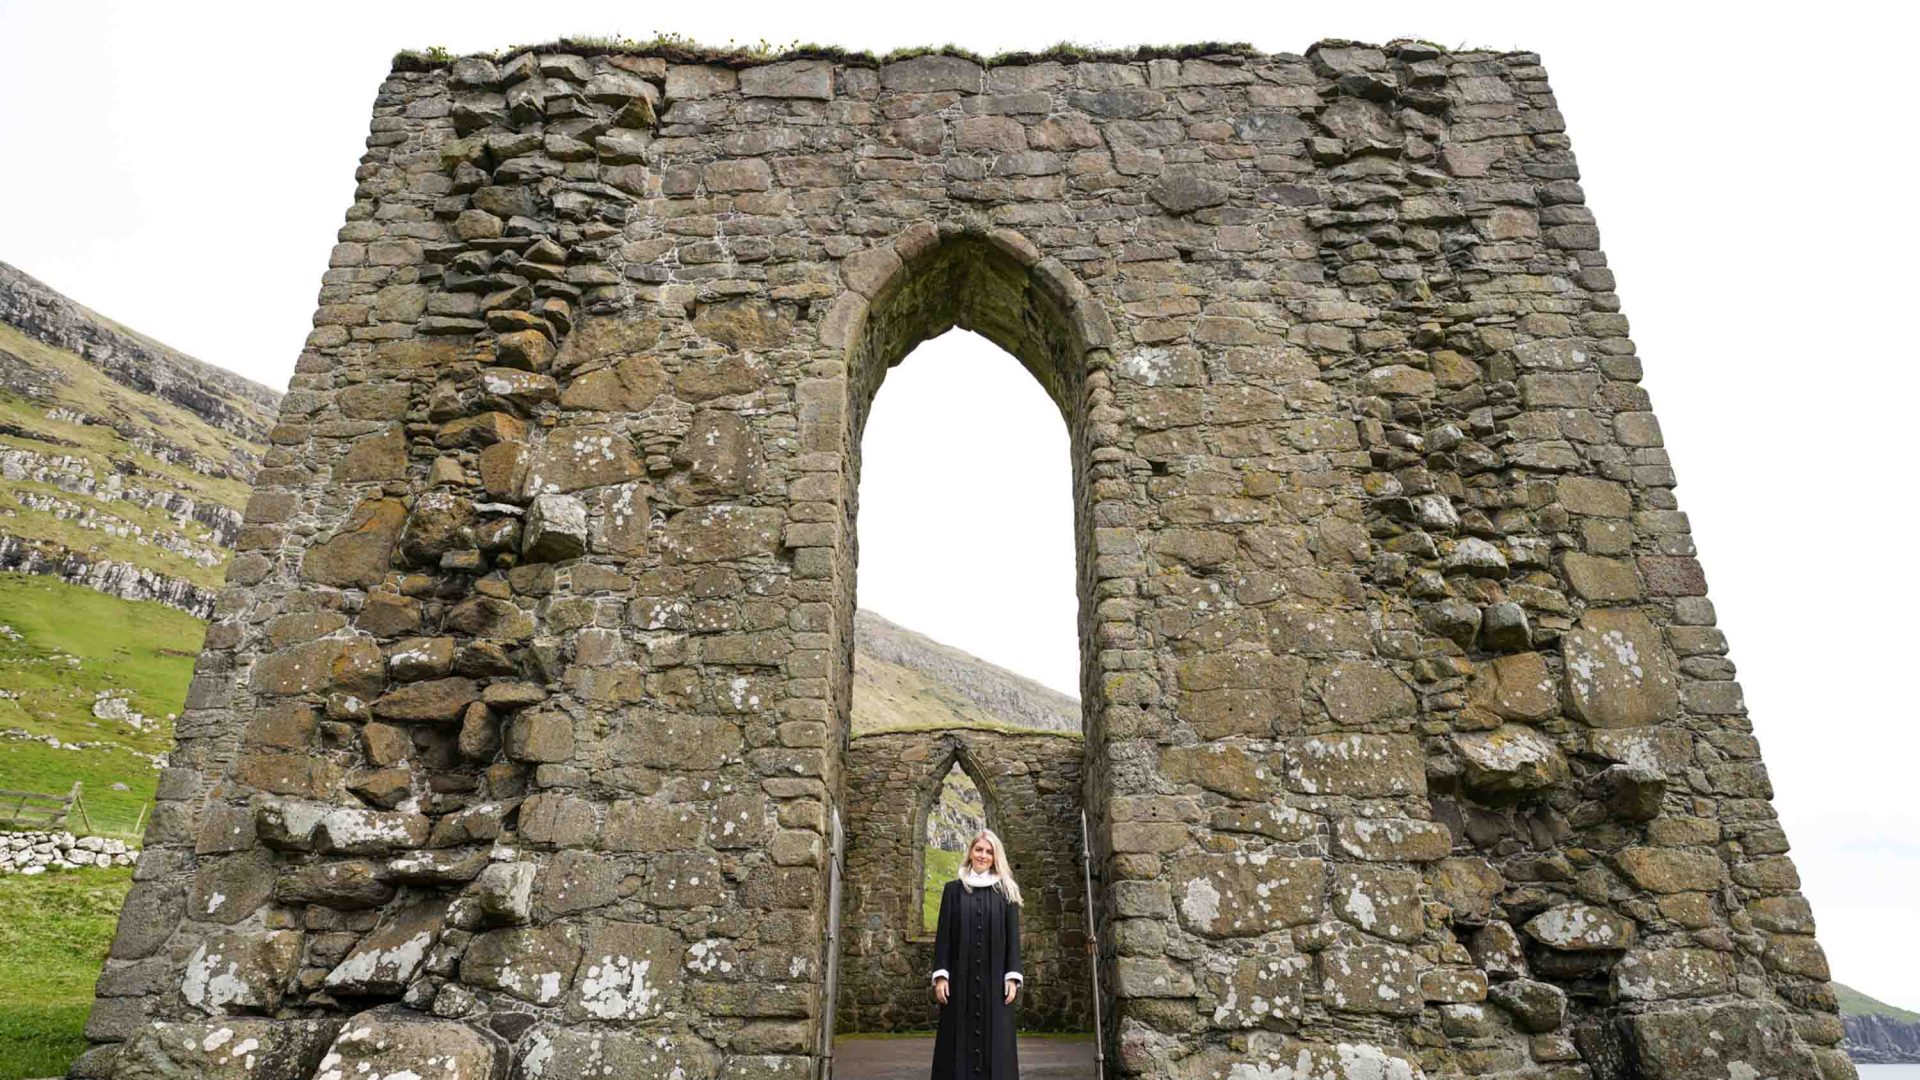 Steintóra Poulsen, a 30-year-old priest in the Faroe Islands, outside of the ruins of St Magnus Cathedral. She wears black and white.